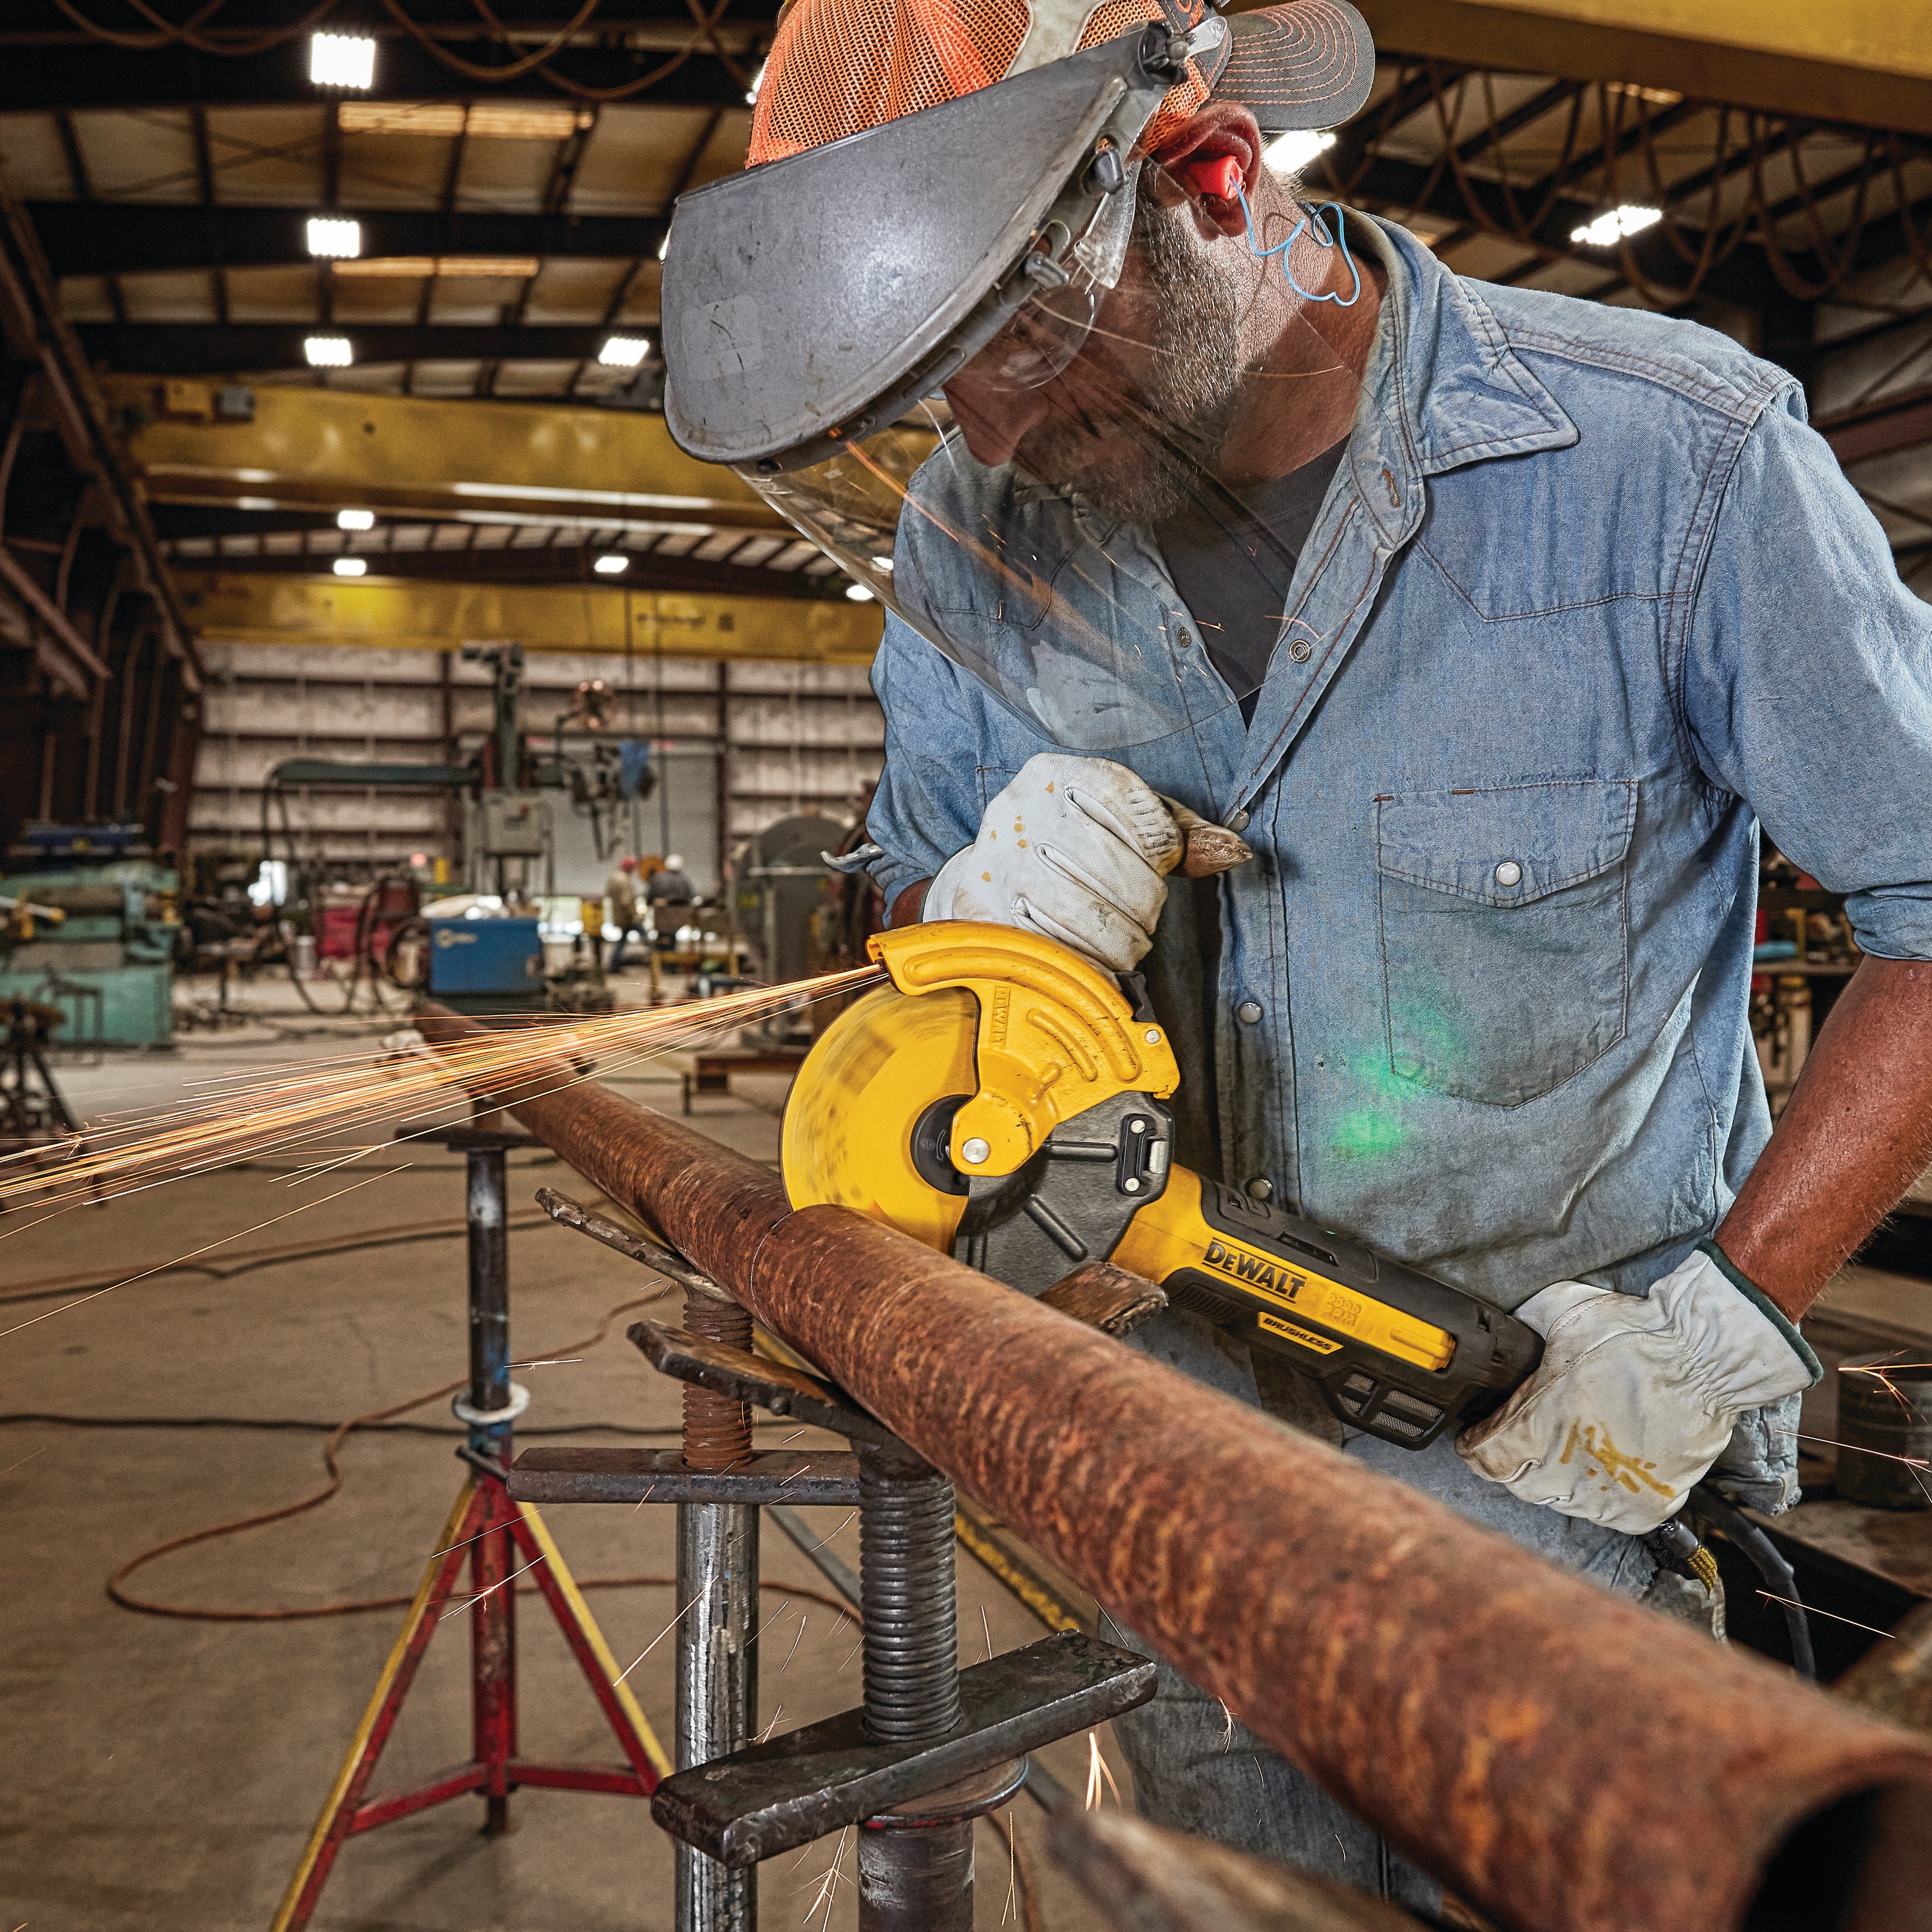 5 inch and 6 inch brushless small angle grinder with a rat tail, adjustable cut-off guard, kickback brake and nolock being used to grind on a metal pipe by a worker at a worksite.